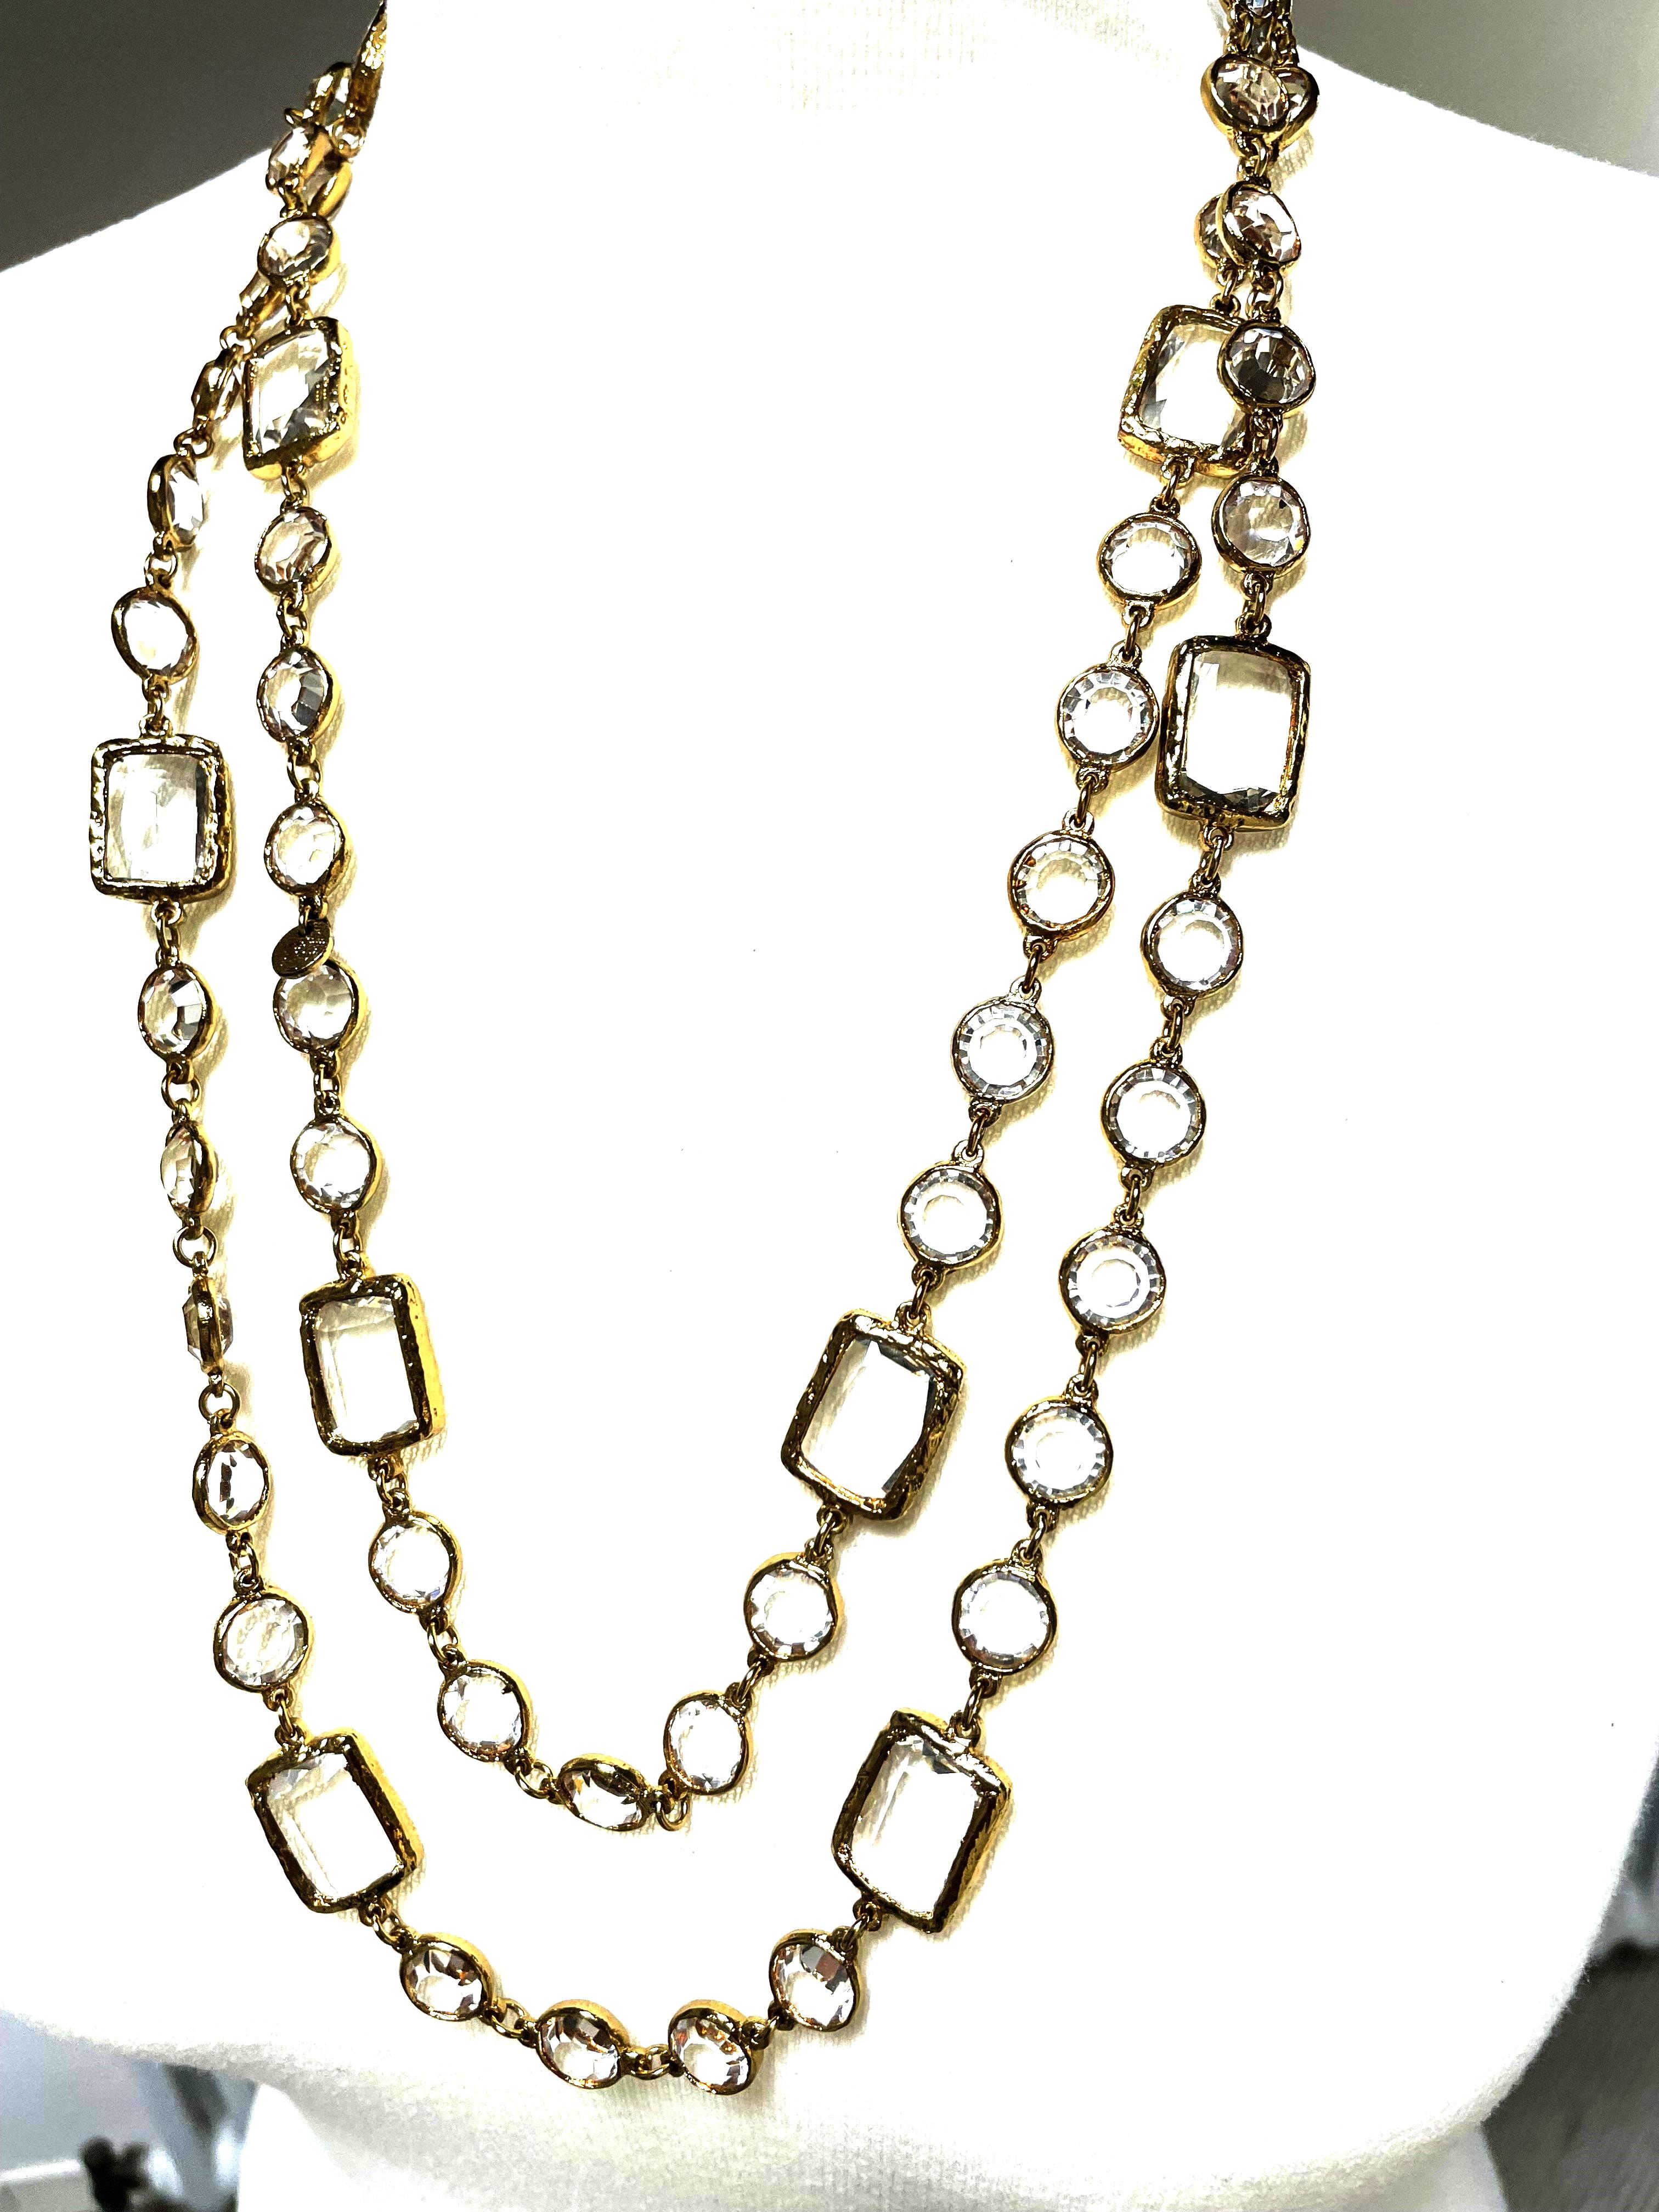 Vintage CHANEL Necklace/Sautoir with 12 clear Chicklets, signed 1981, gold plate 3